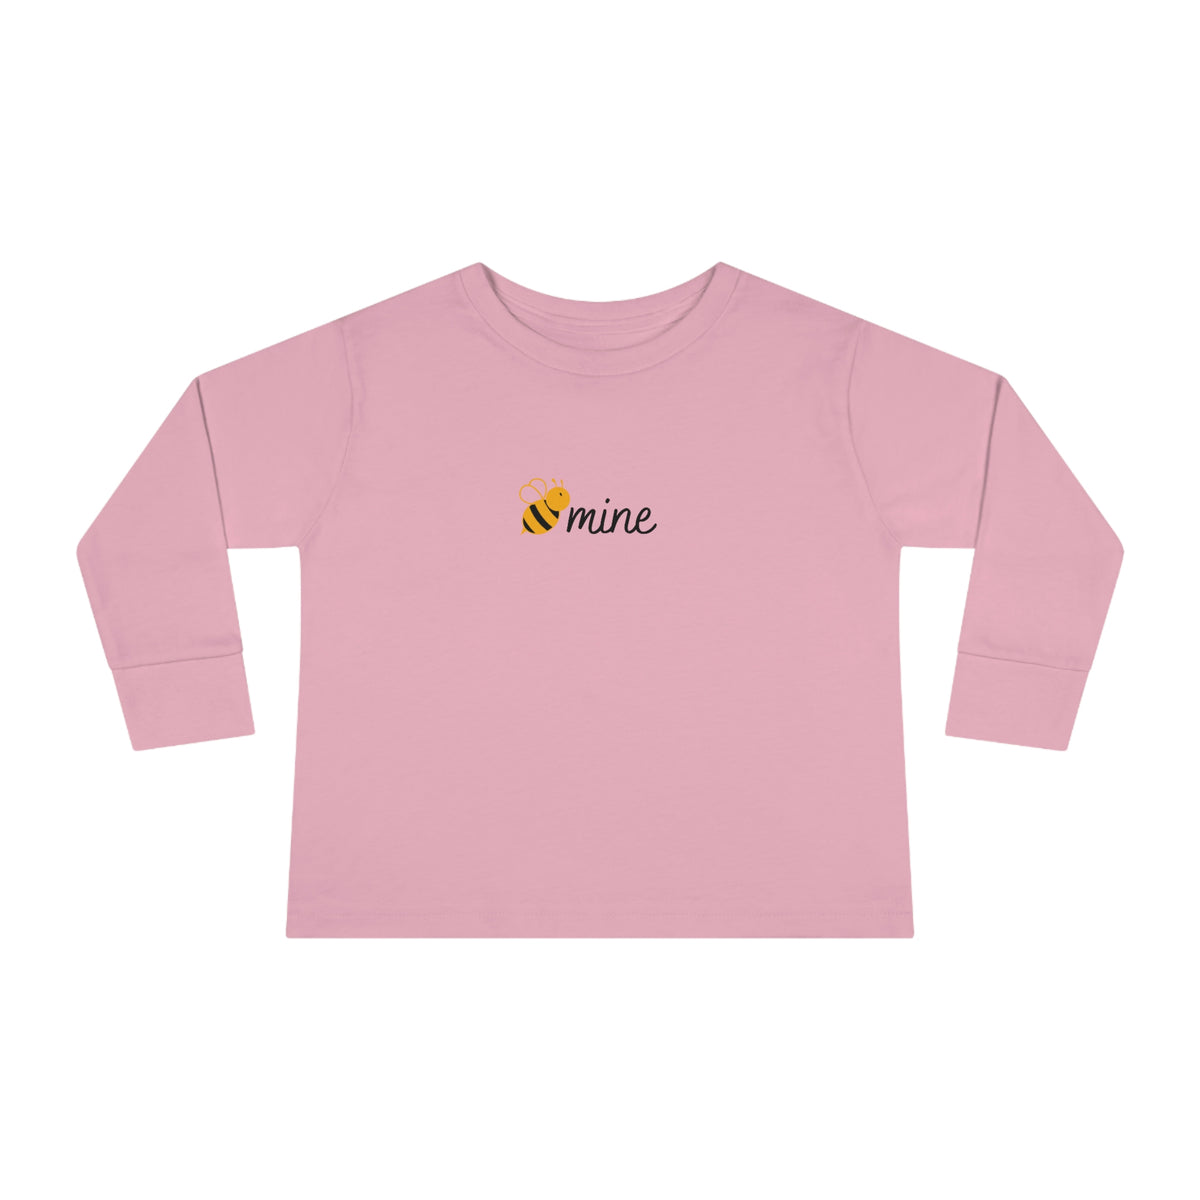 Bee Mine Toddler Long Sleeve Tee, Toddler Valentines Tee, Valentines Tee for Toddlers, Cute Kids Vday Shirt, Funny Valentines Shirt